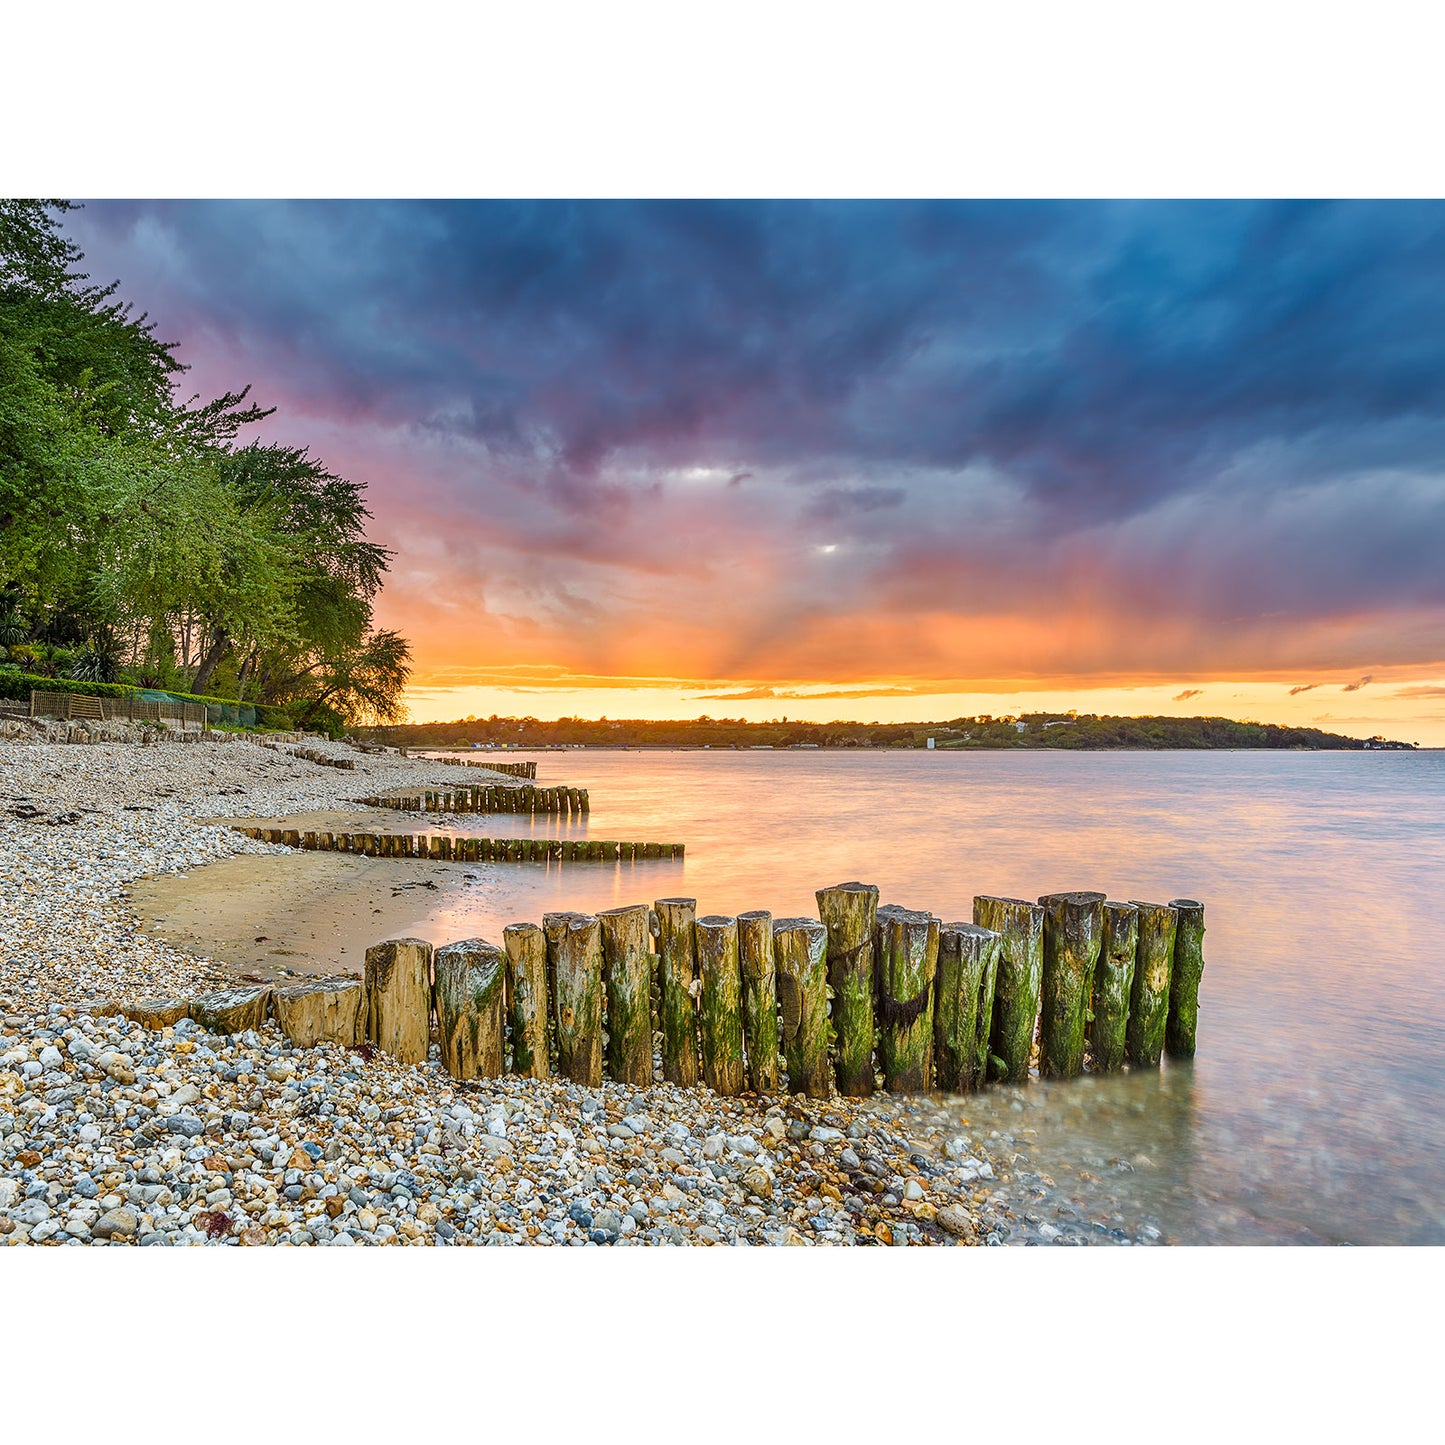 Sunset over Bembridge Beach on the Isle of Wight with wooden pilings and a dramatic clouded sky captured by Available Light Photography.